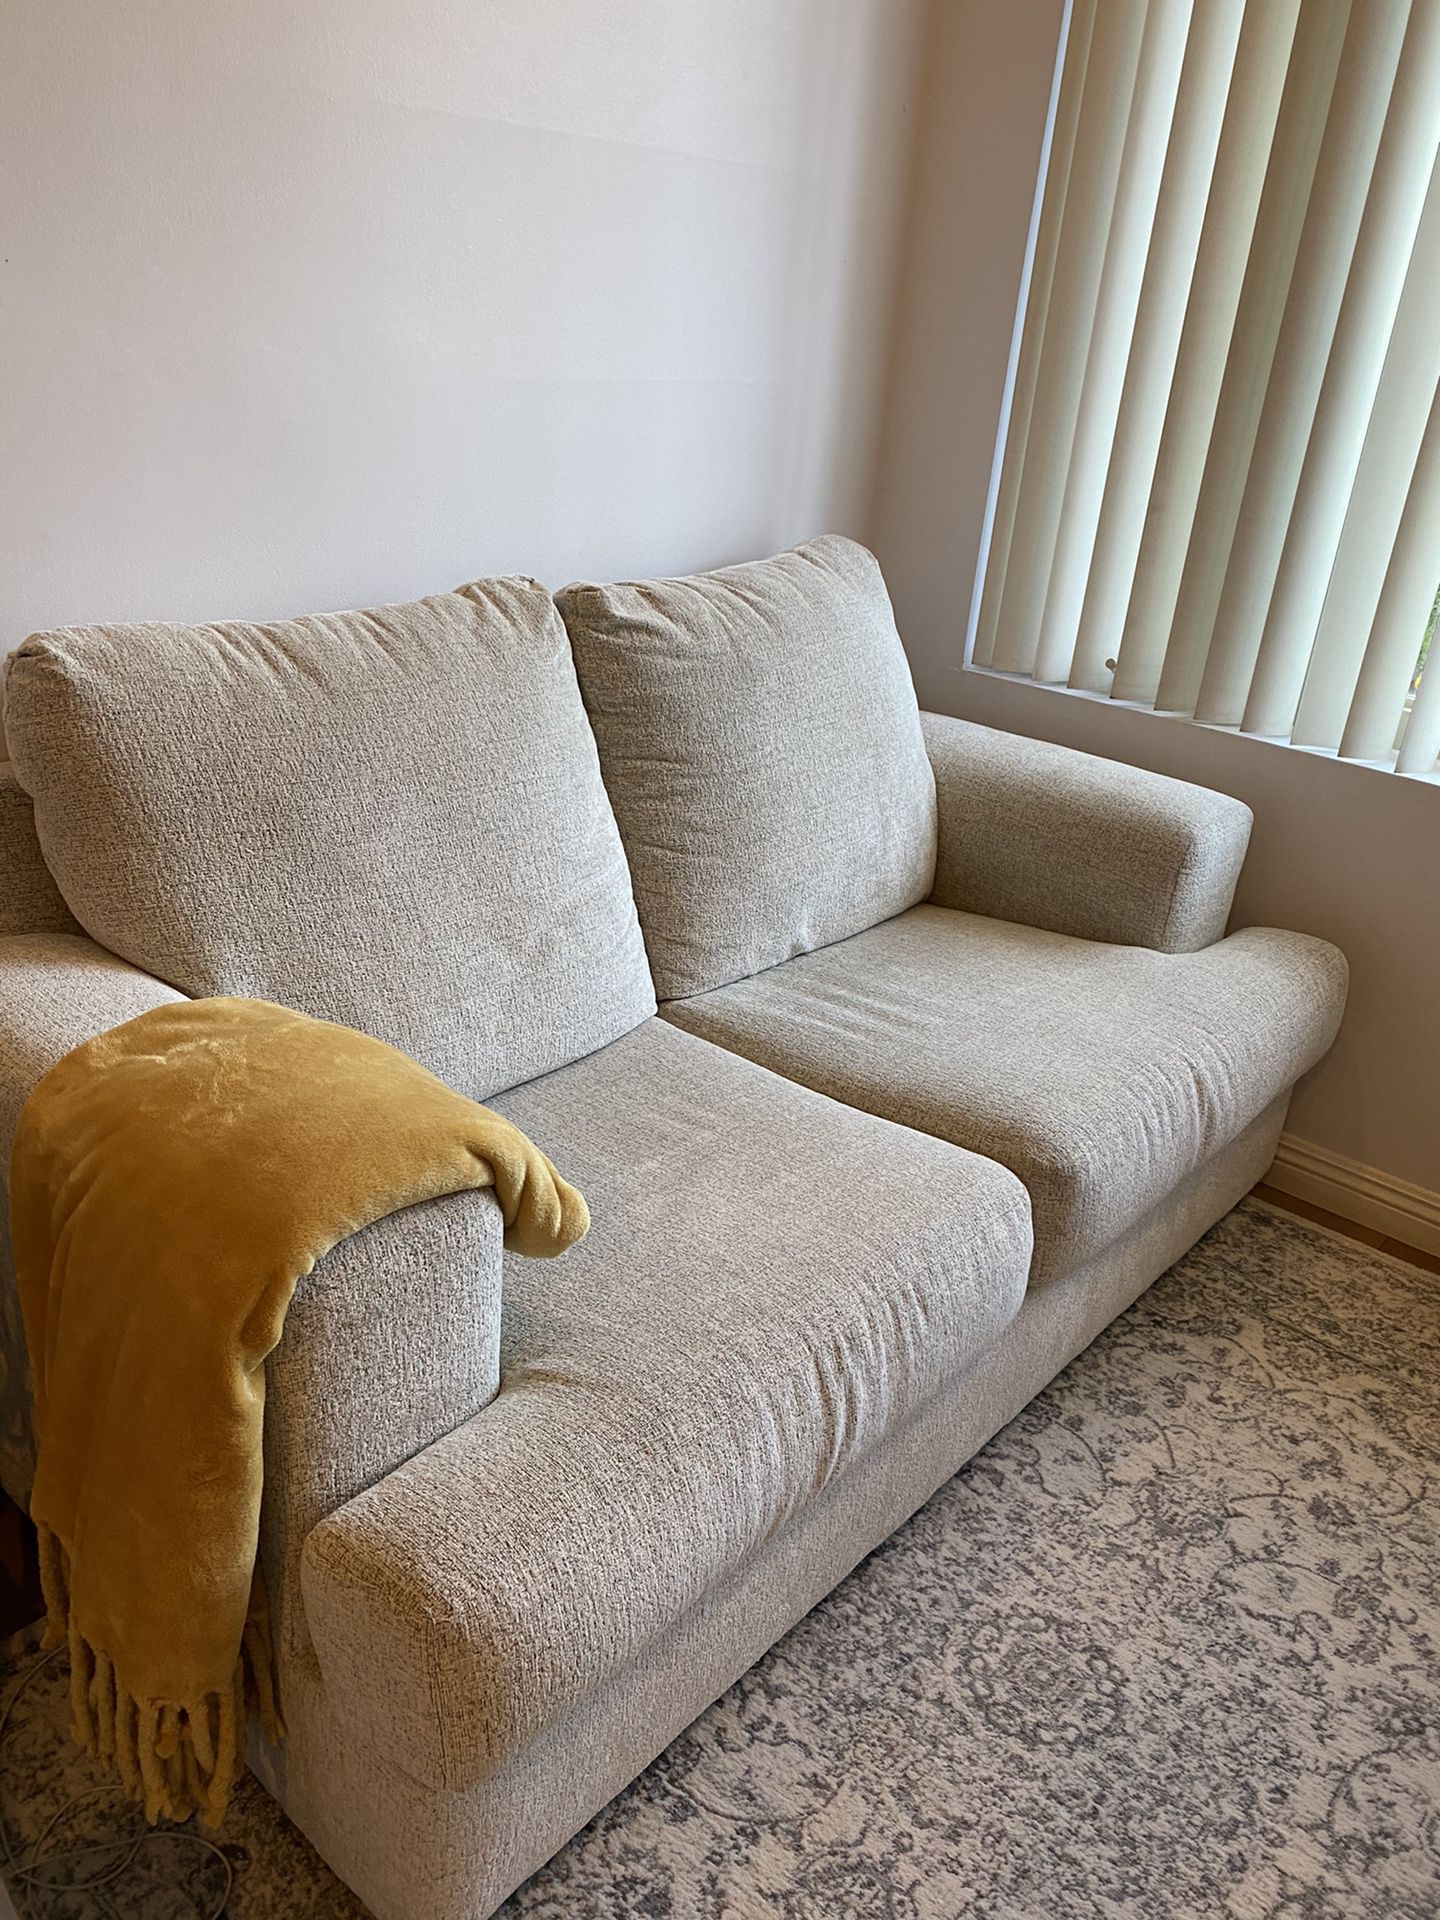 Loveseat/Couch - Good Condition